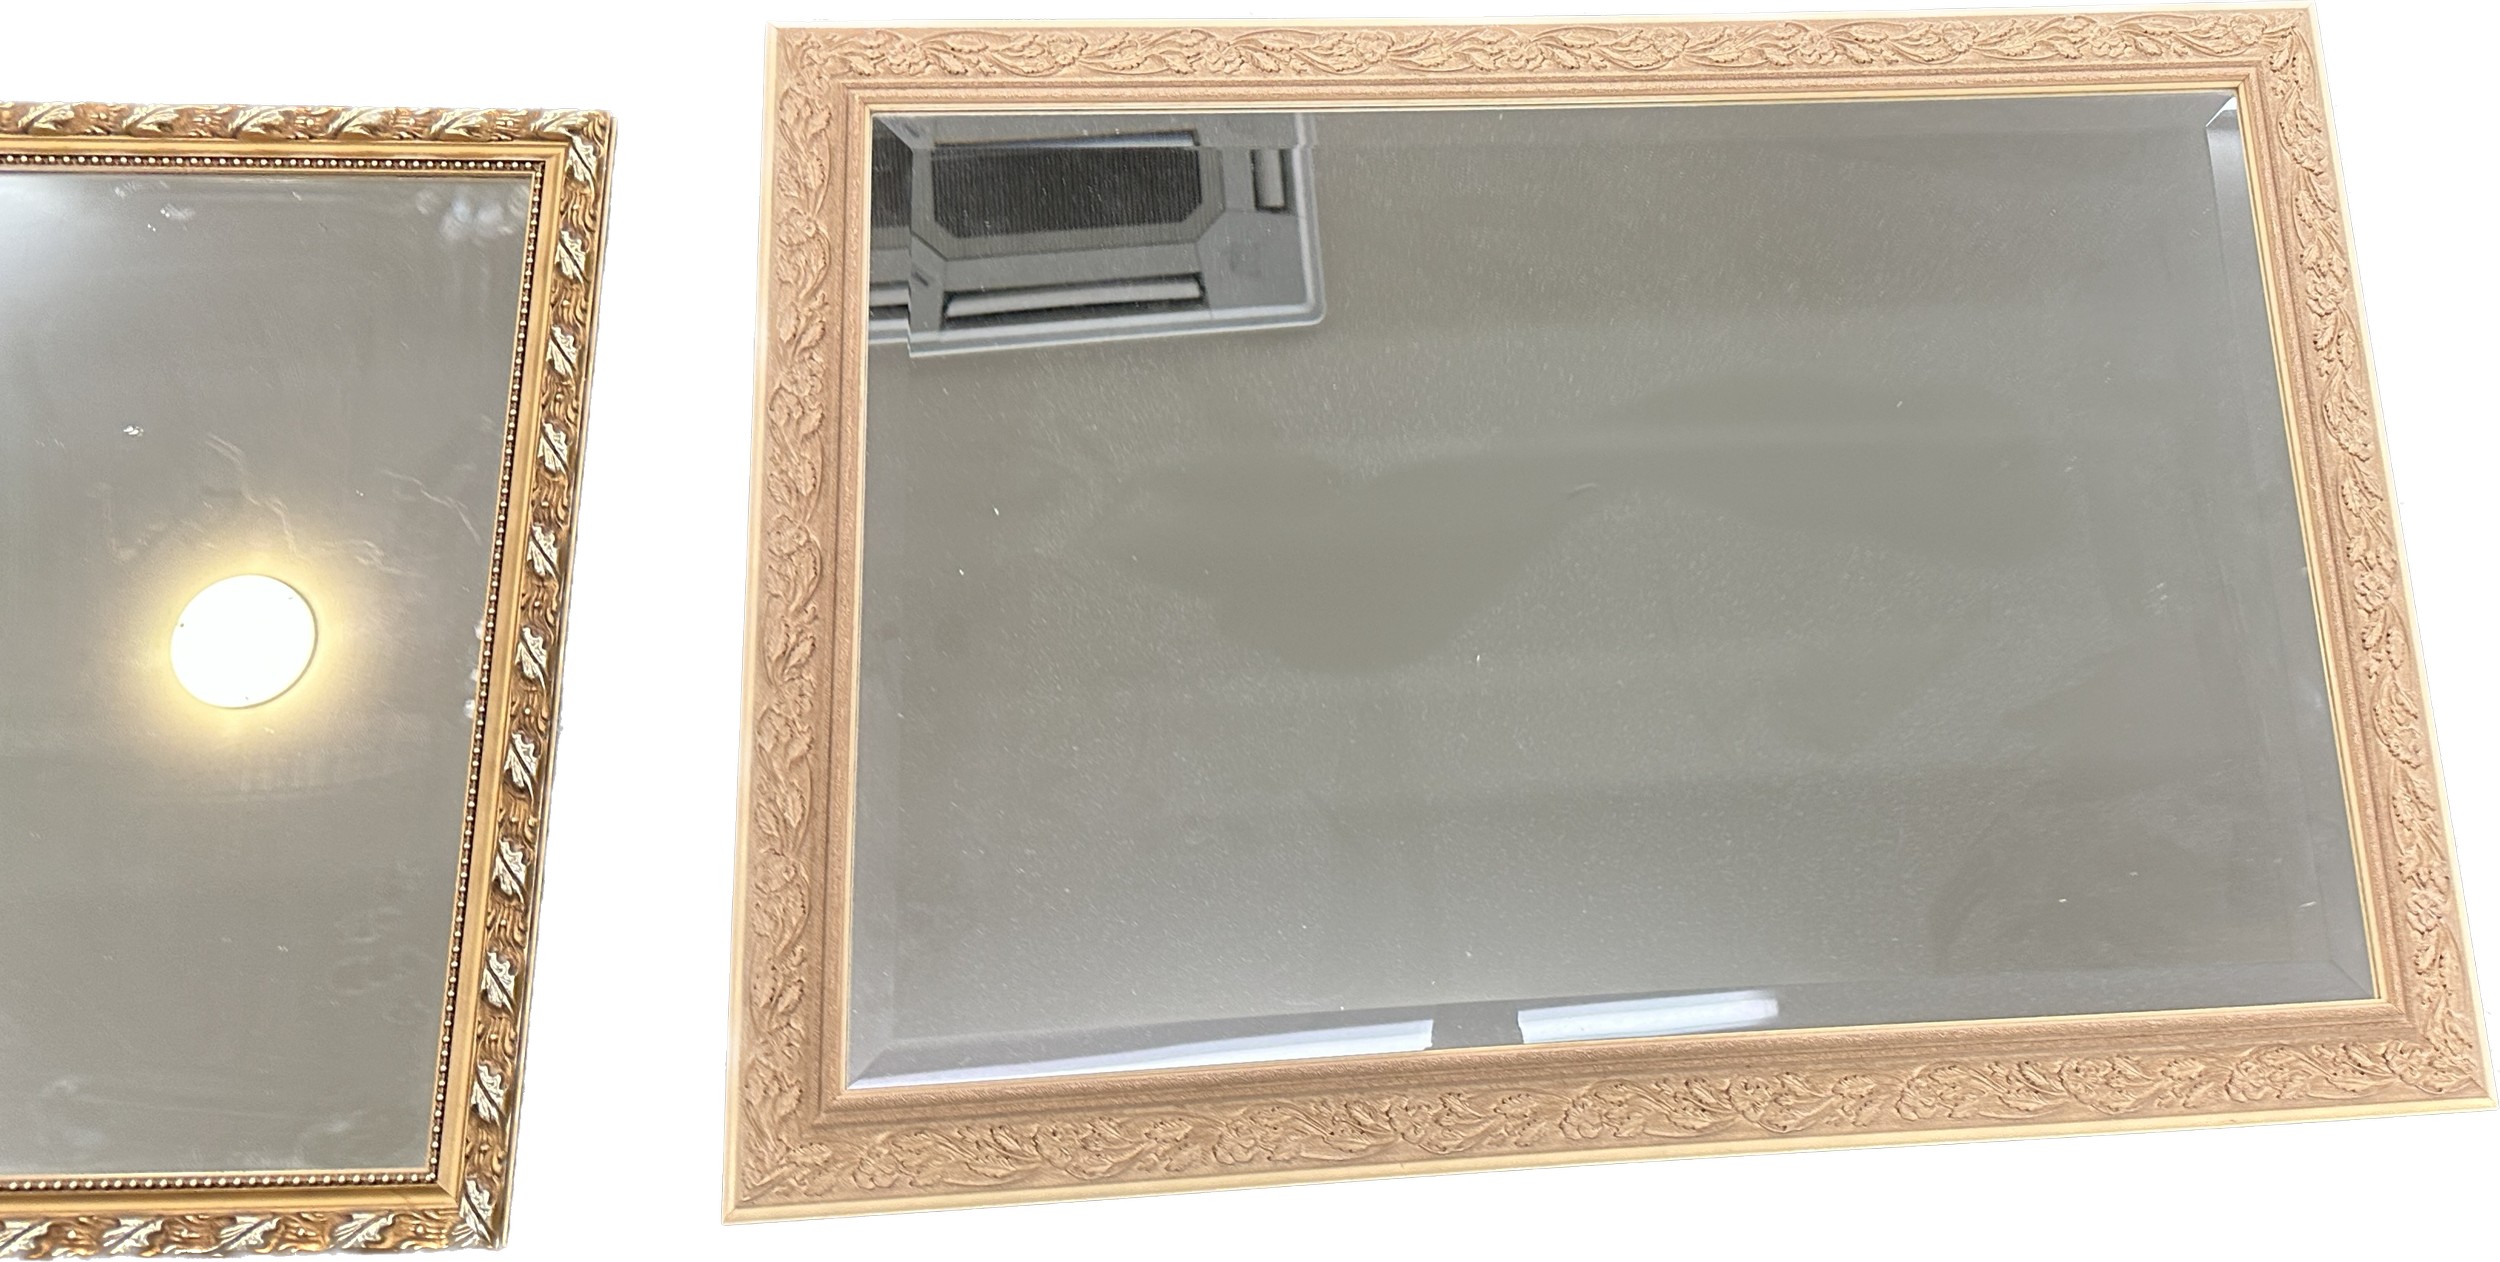 2 Large framed mirror, largest measures approximately 34 inches wide by 24 inches tall - Image 3 of 3